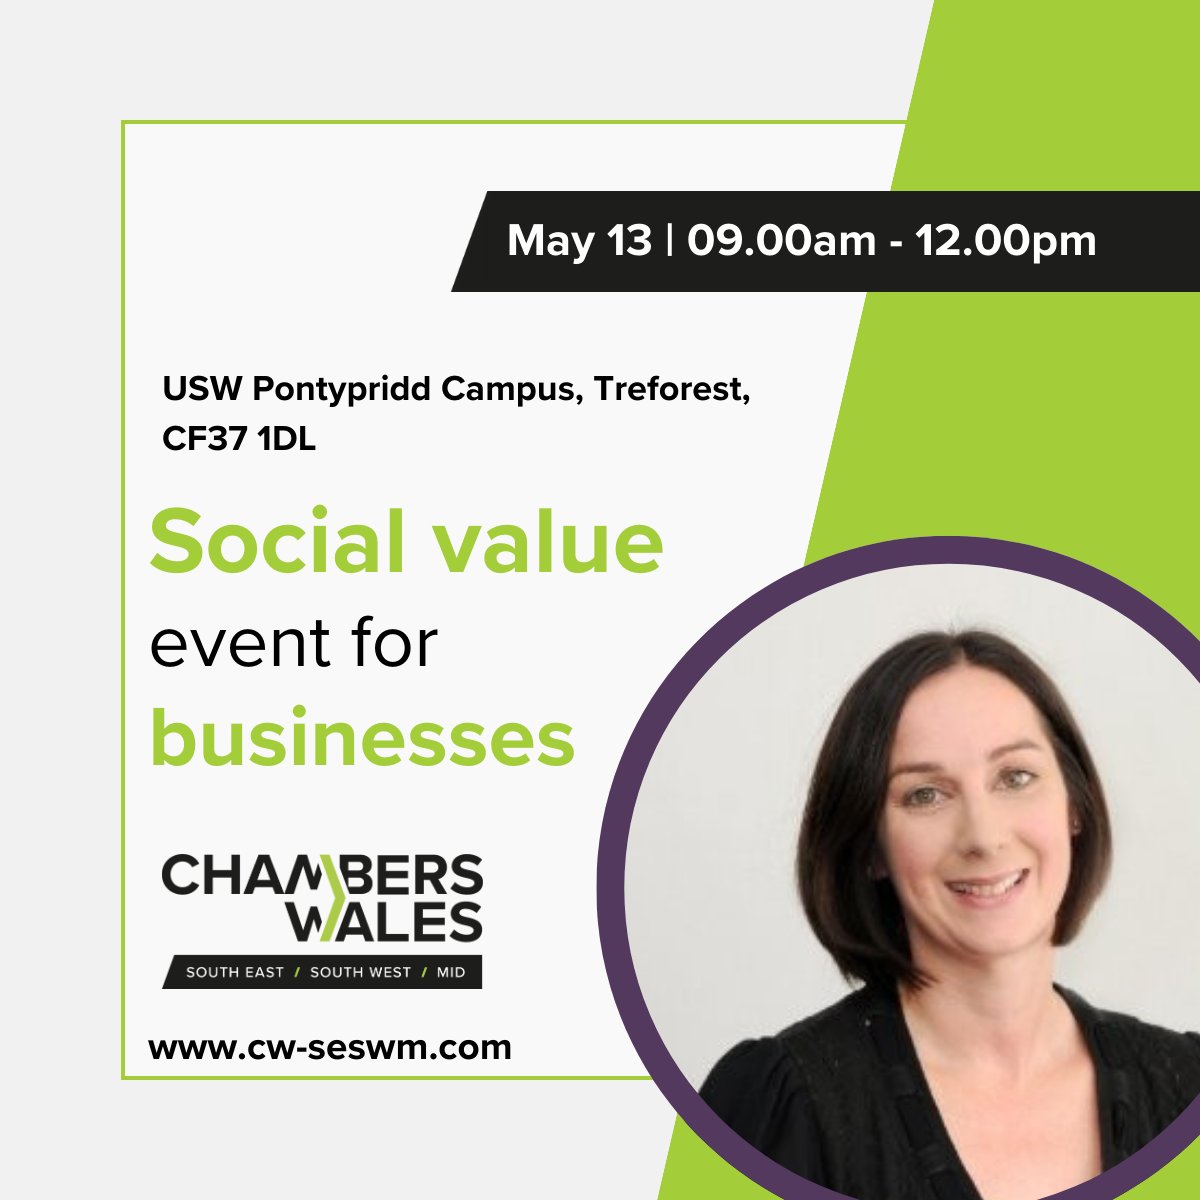 Catherine Lund of @unisouthwales will be speaking about delivering social value through supply chains at our Social Value event on 13 May. Sign up here: eventbrite.co.uk/e/the-importan…